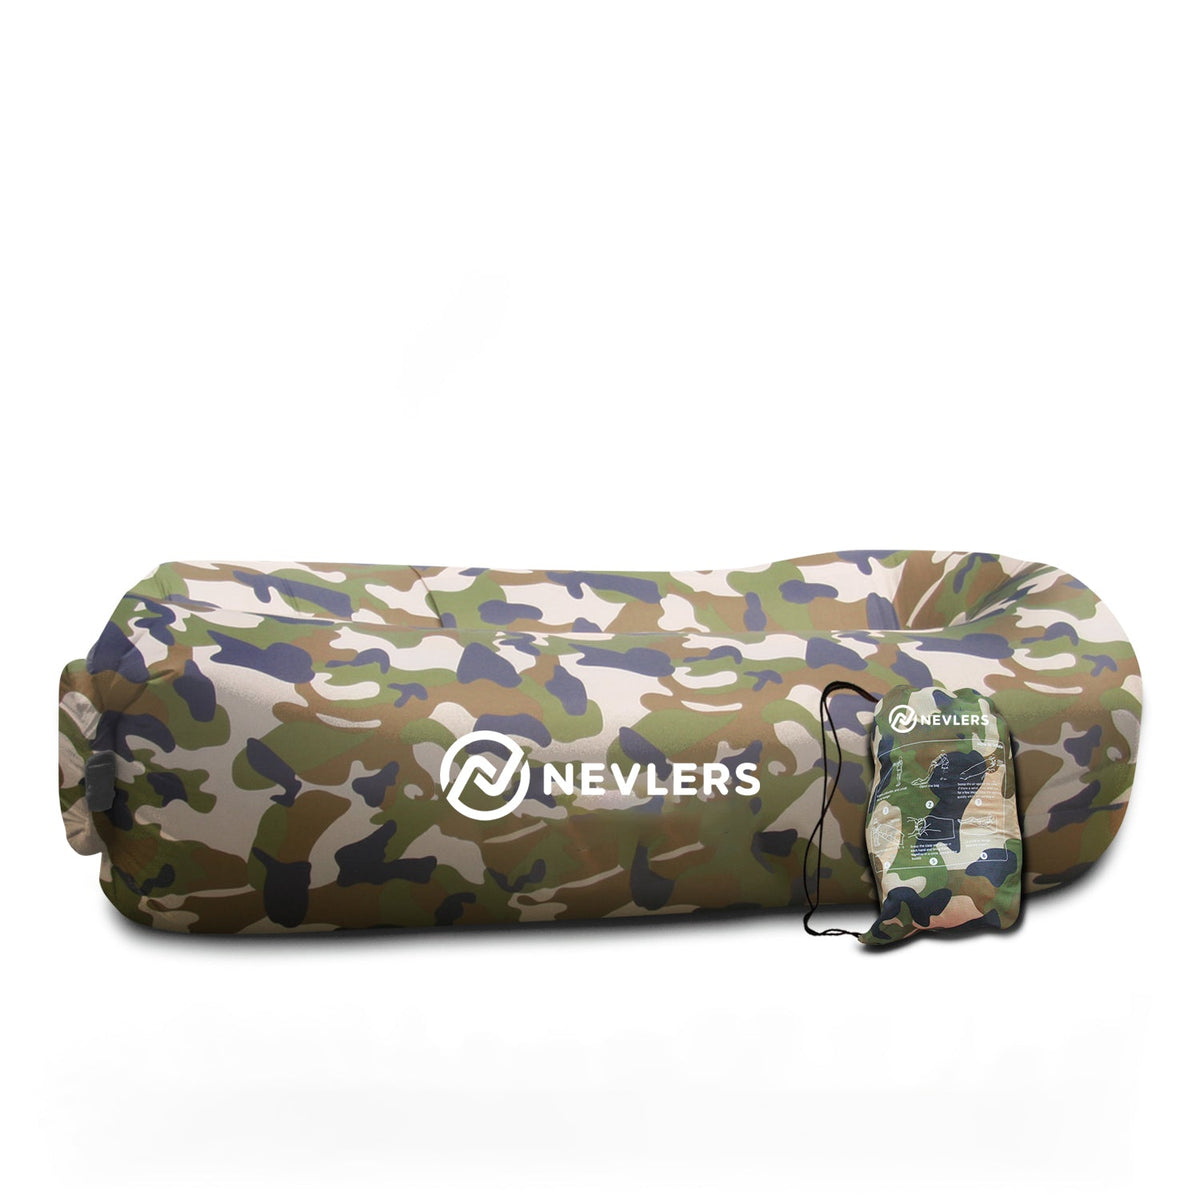 Inflatable Lounger - Camouflage - 1 Pack